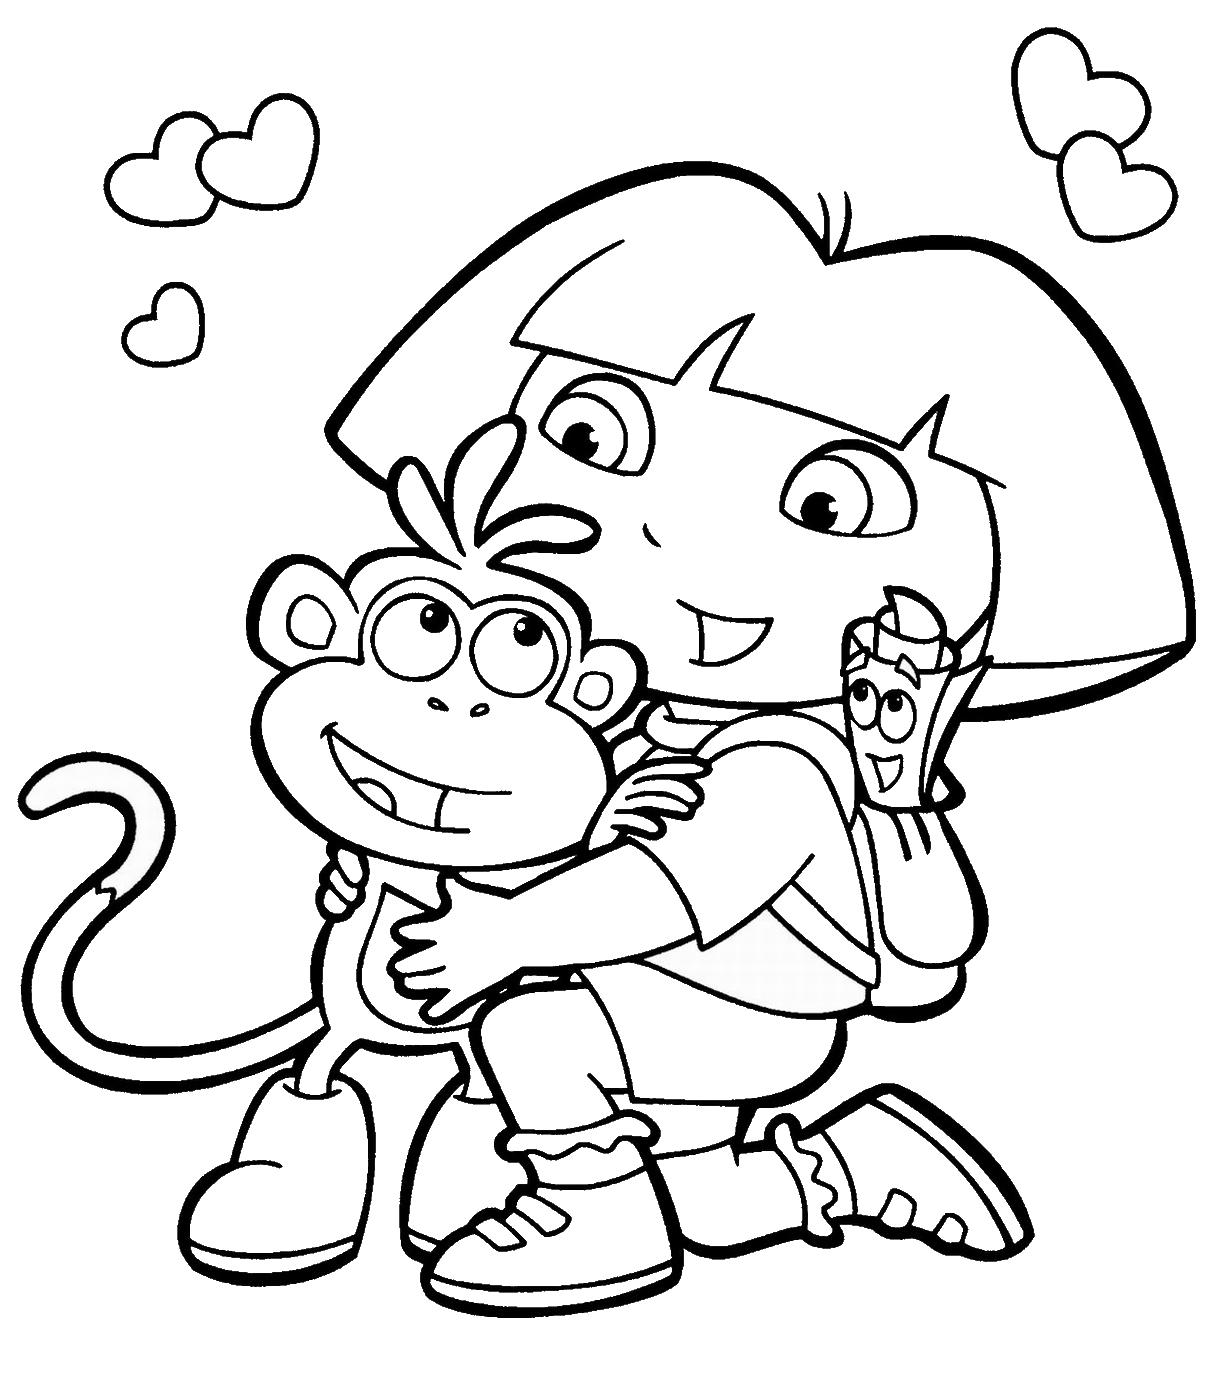 Dora the Explorer Coloring Pages Cartoons cl_dora_65 Printable 2020 2626 Coloring4free